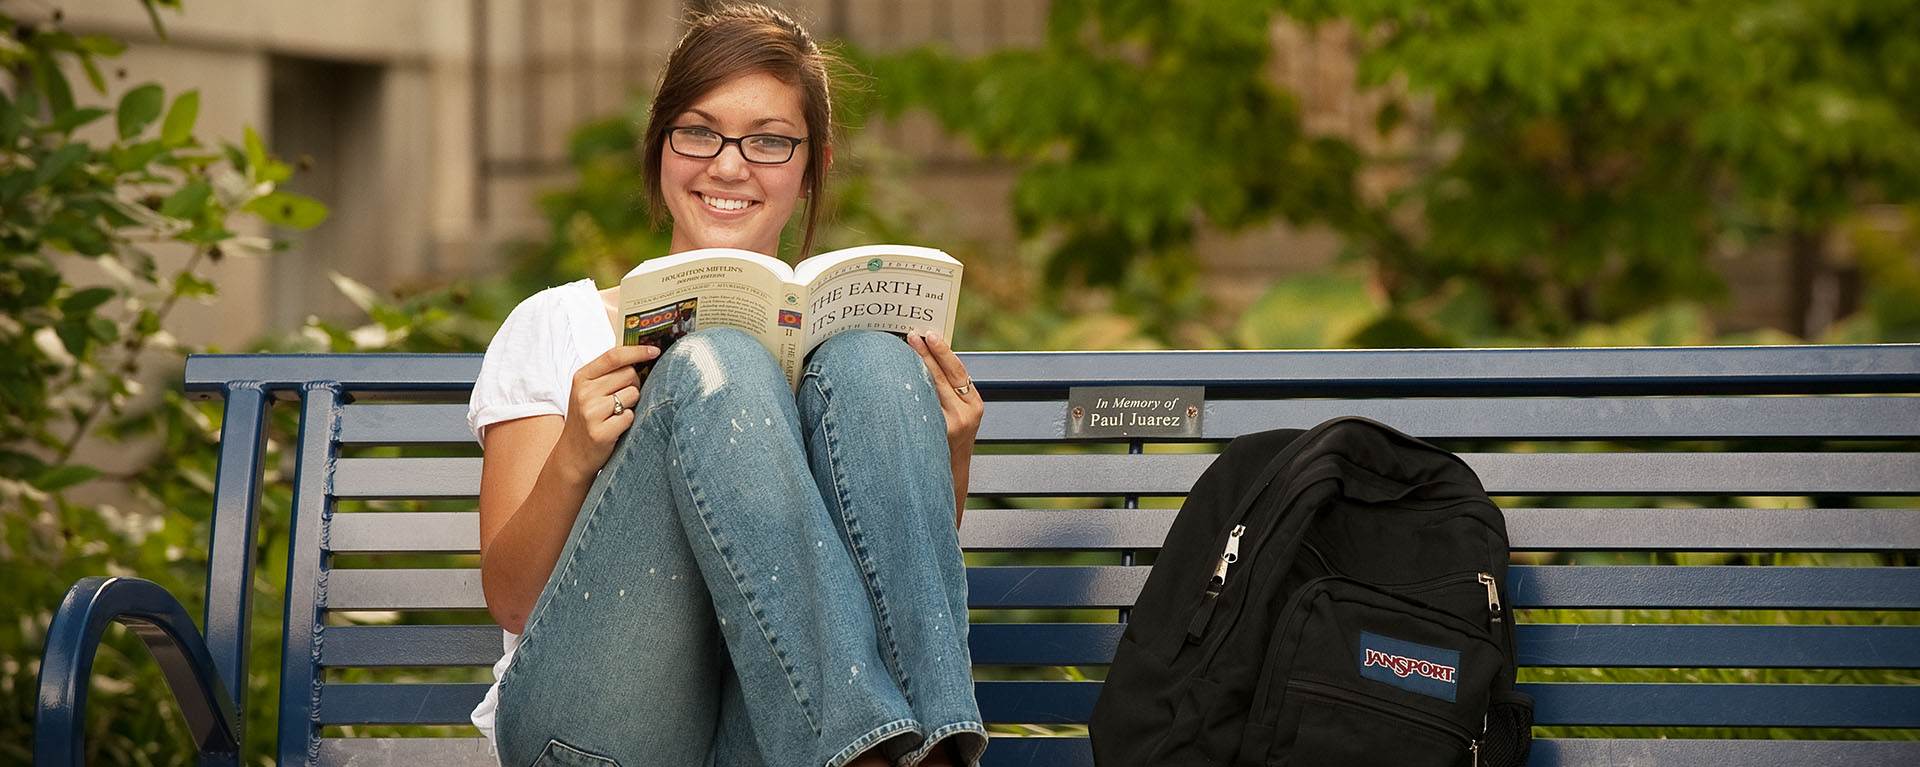 young woman sitting on bench reading